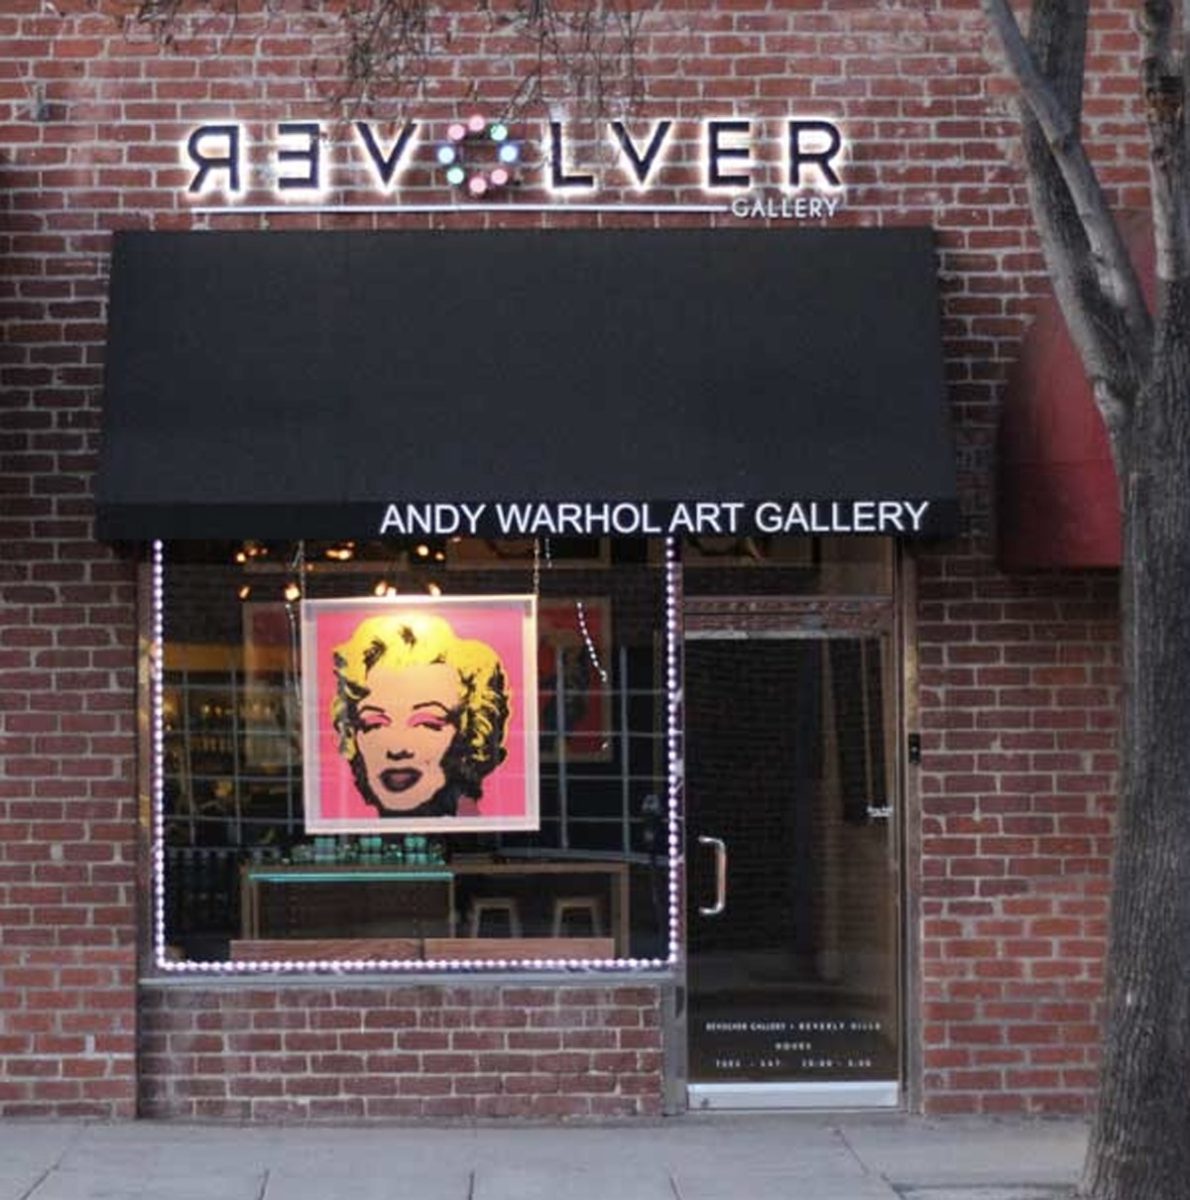 revolver-gallery-front-image